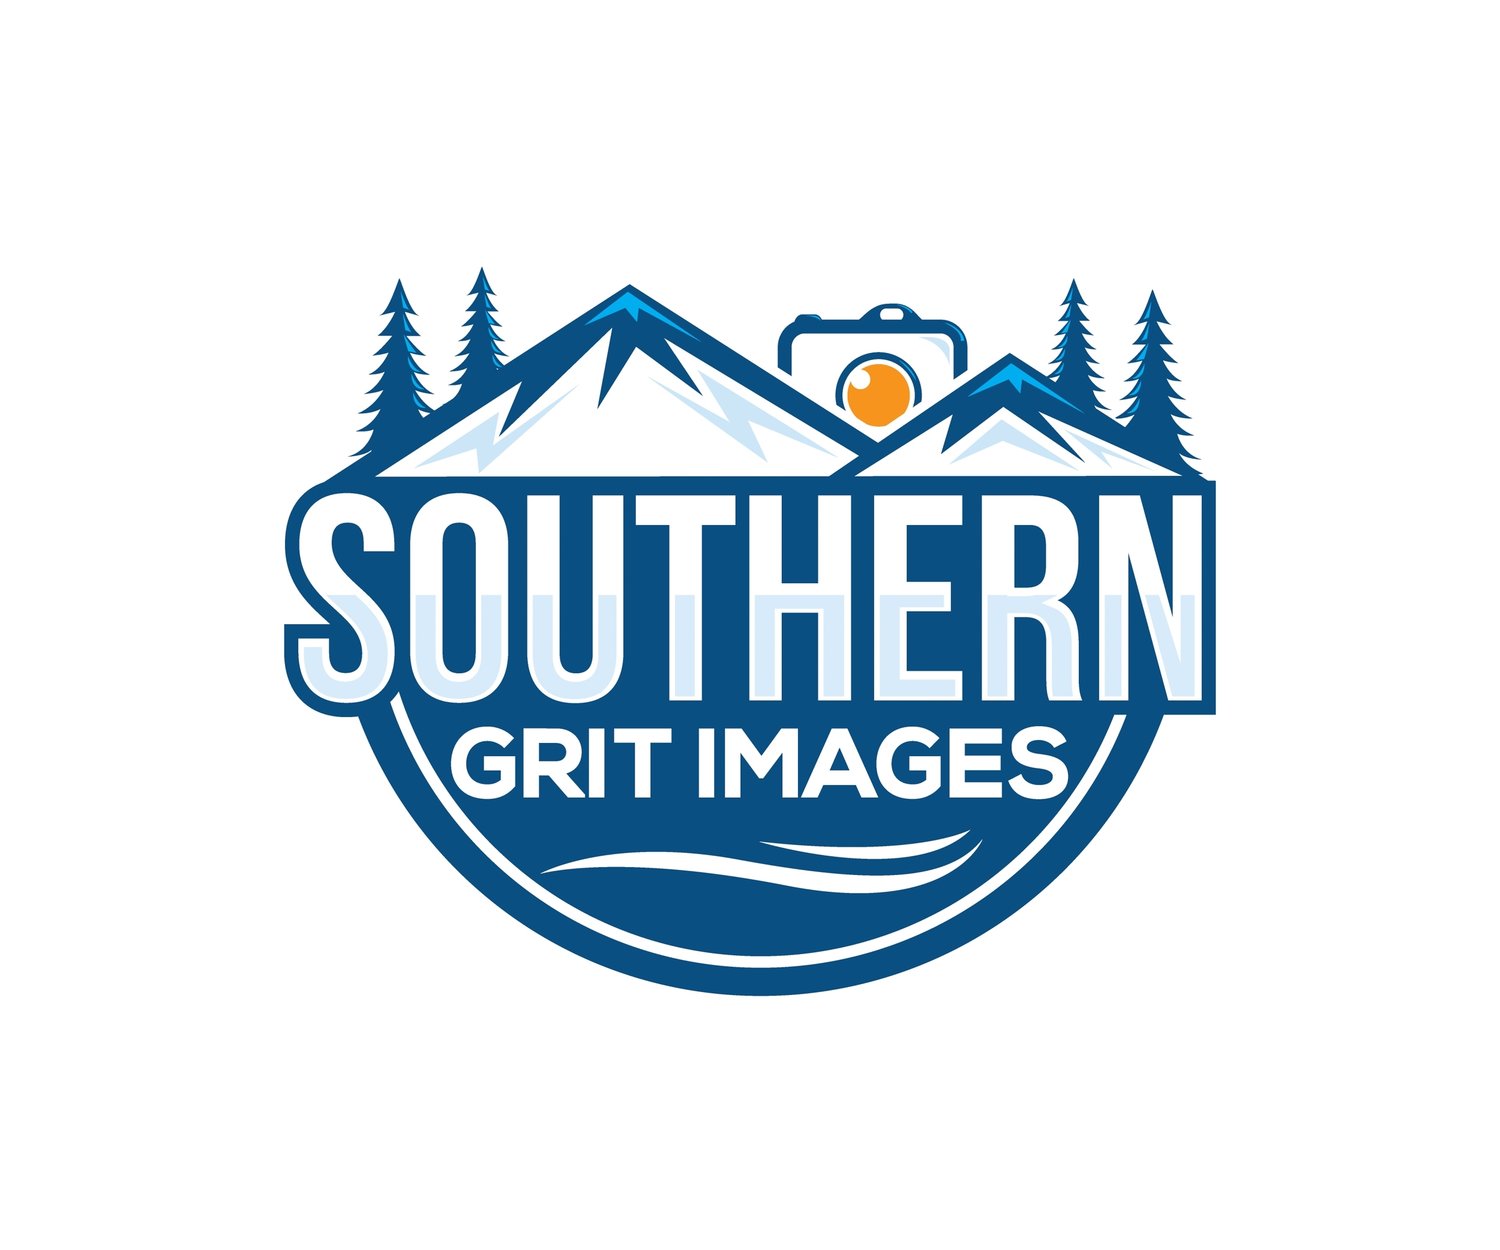 Southern Grit Images